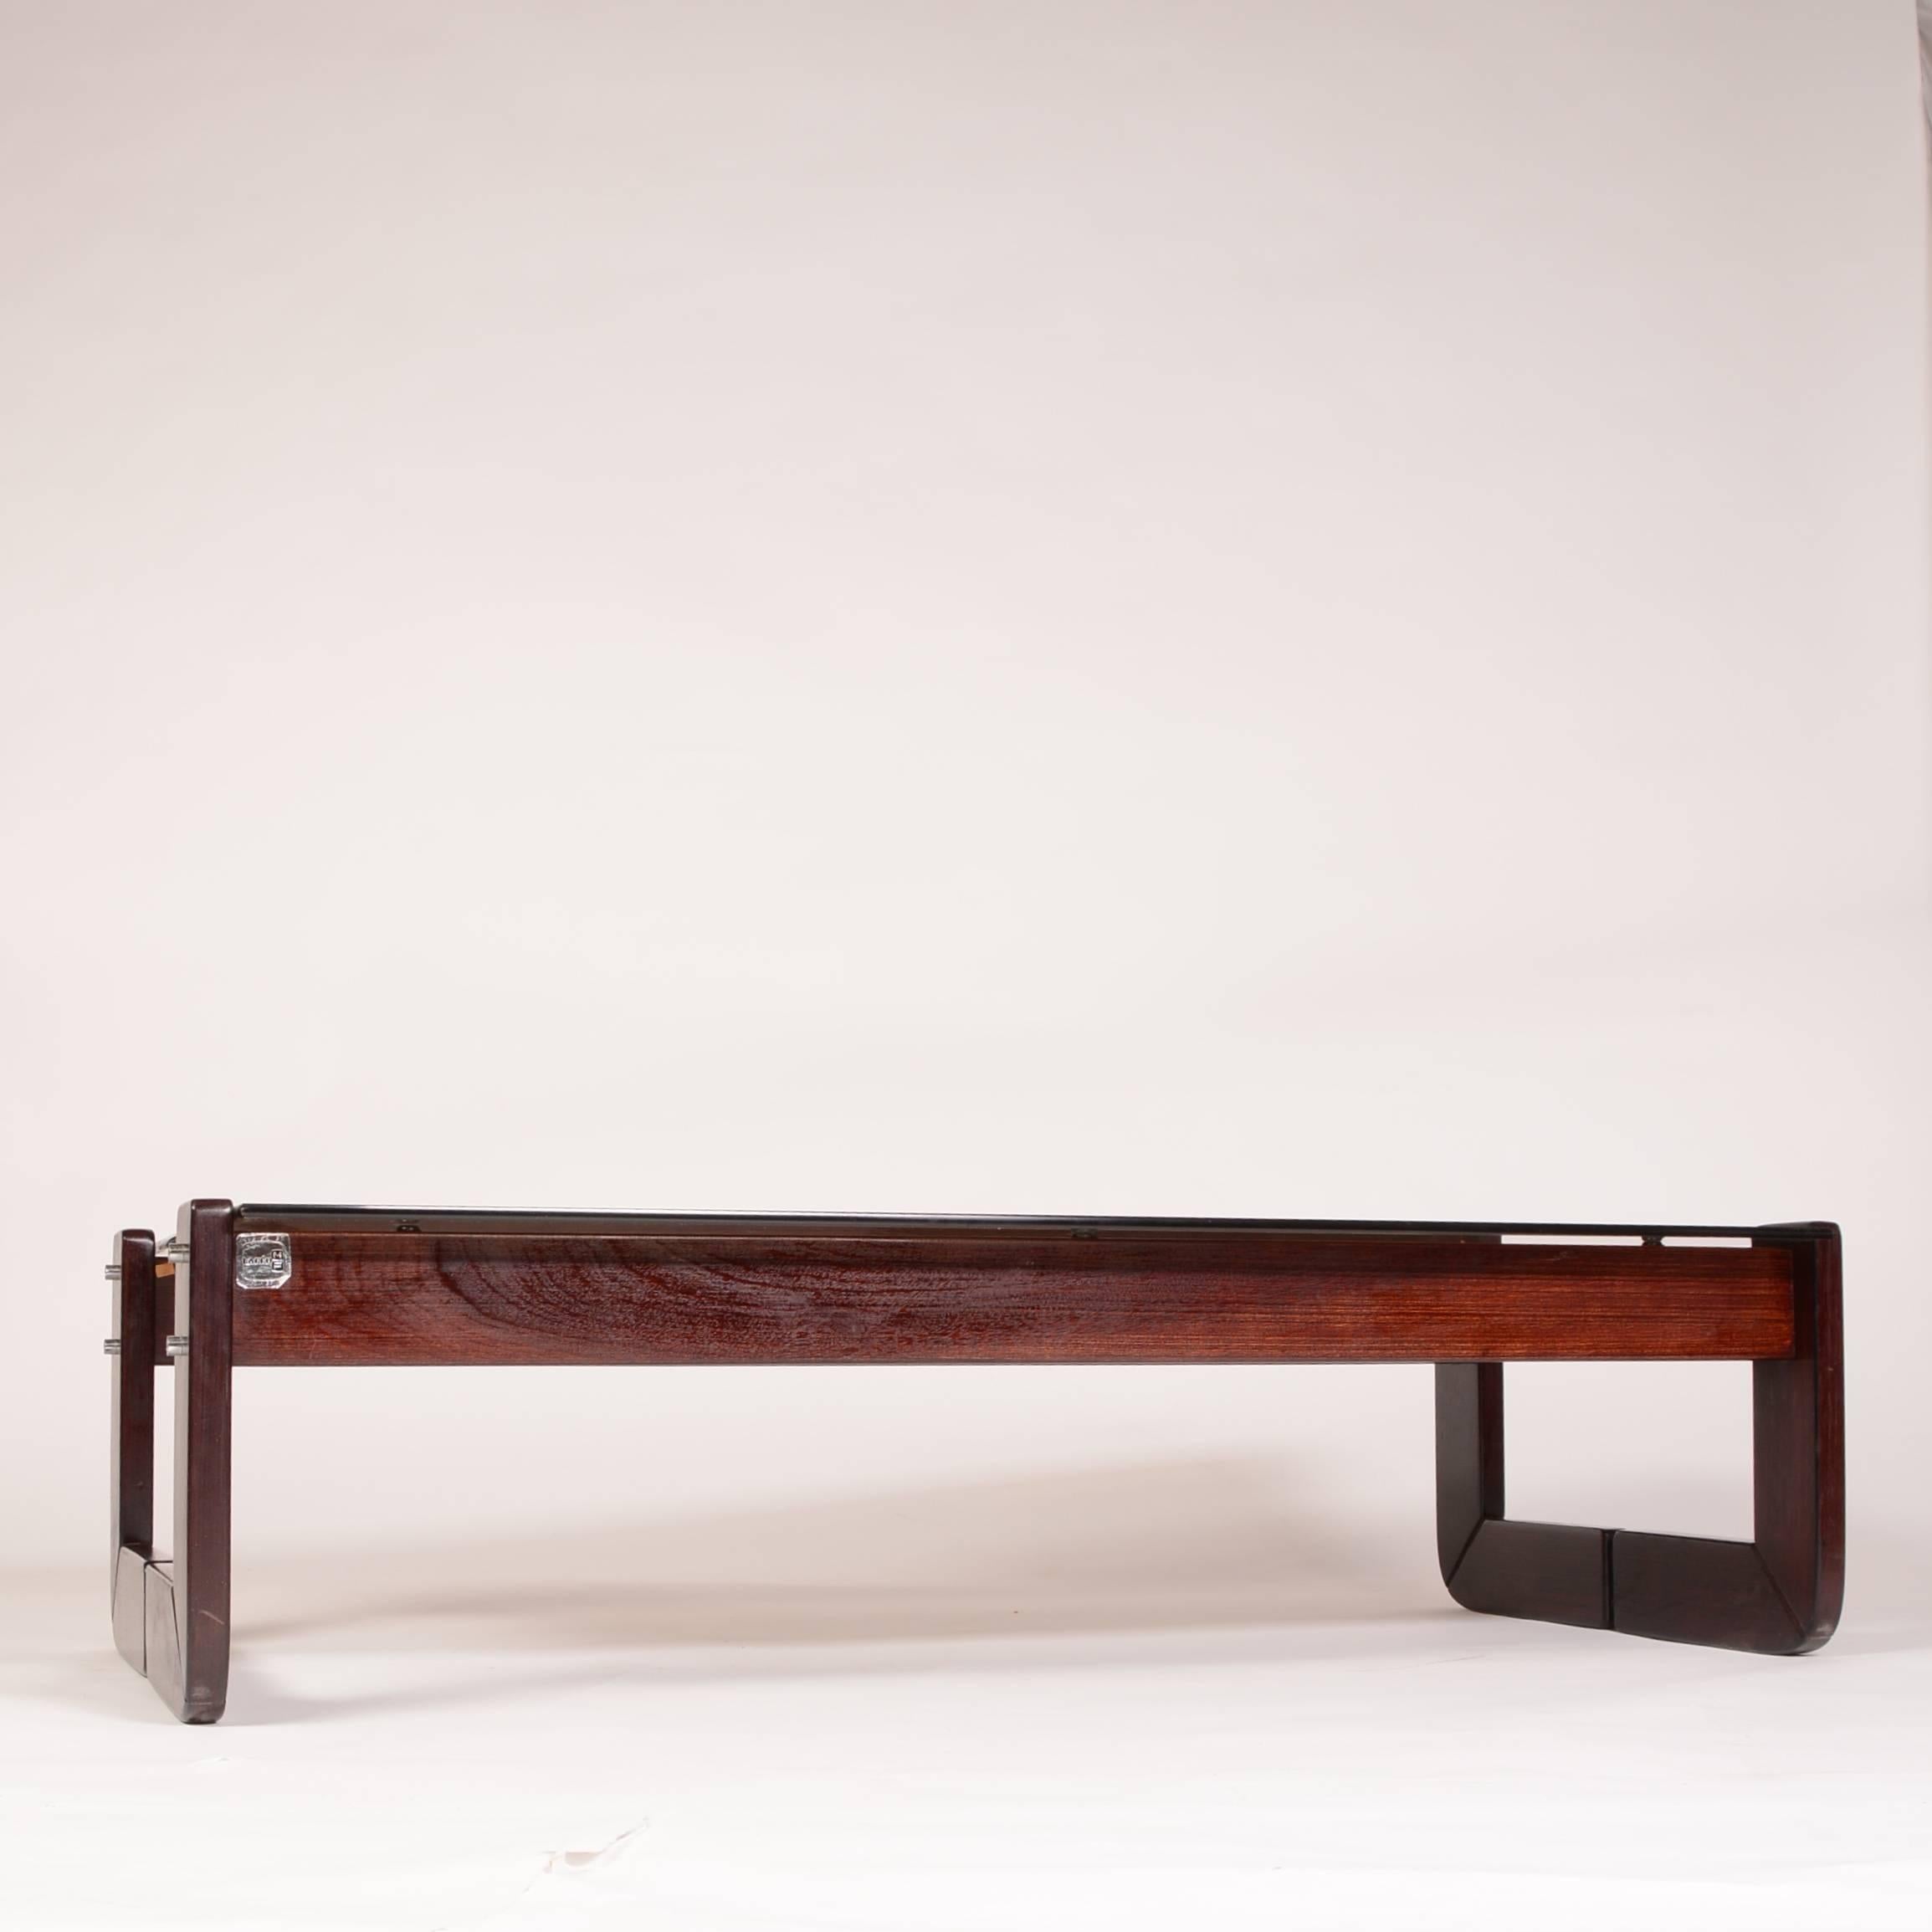 Brazilian Percival Lafer Rosewood and Smoked Glass Coffee Table